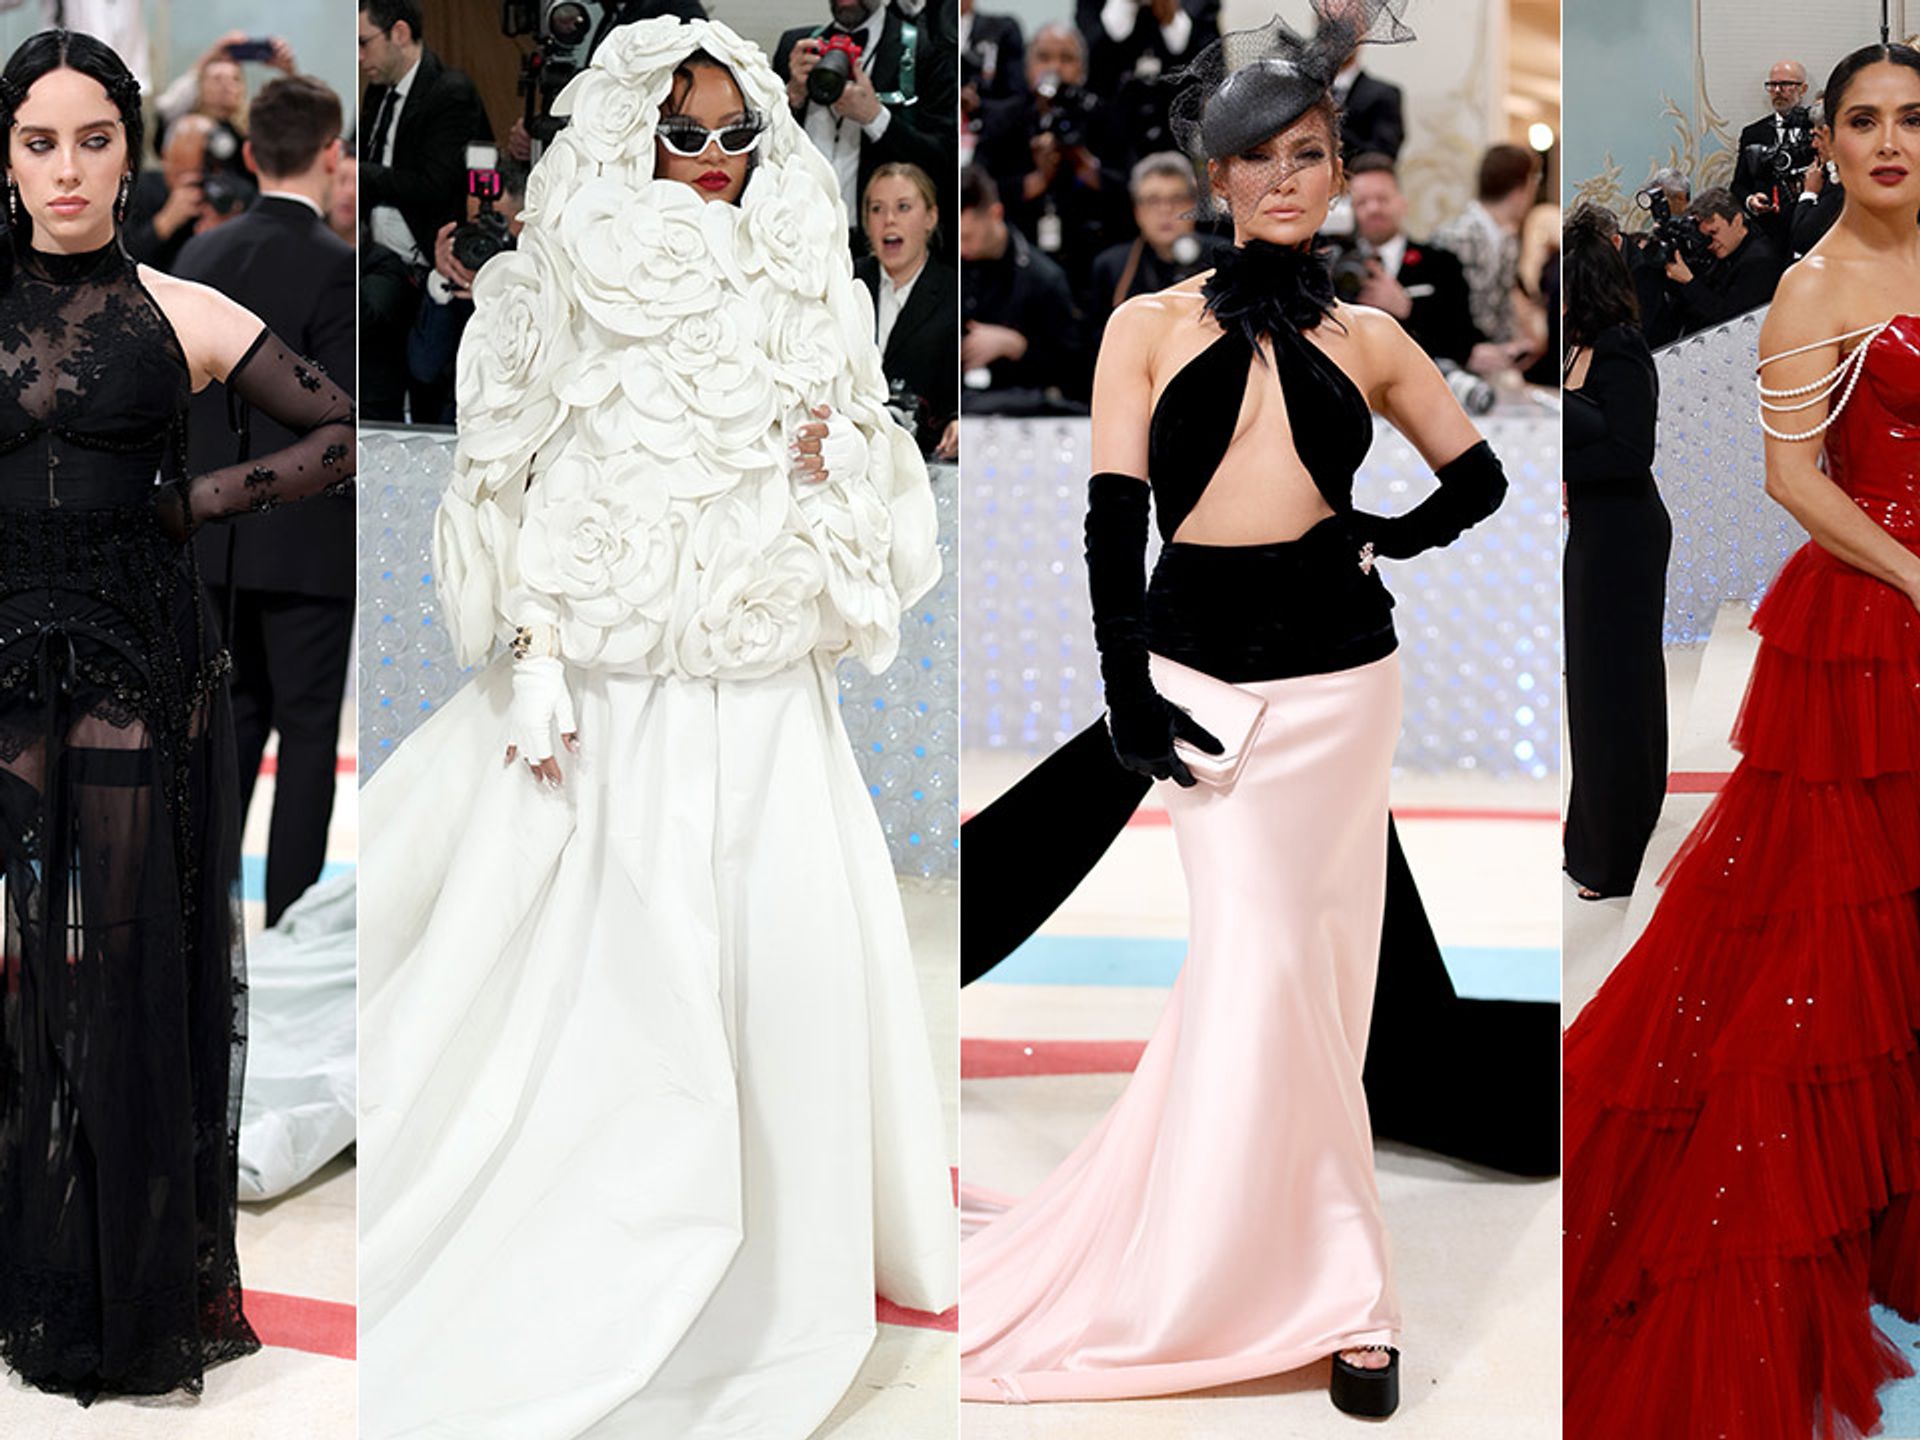 Met Gala 2023: See Every Celeb's Red Carpet Fashion, Full Guest List  Revealed (Photos), 2023 Met Gala, Extended, Fashion, Met Gala